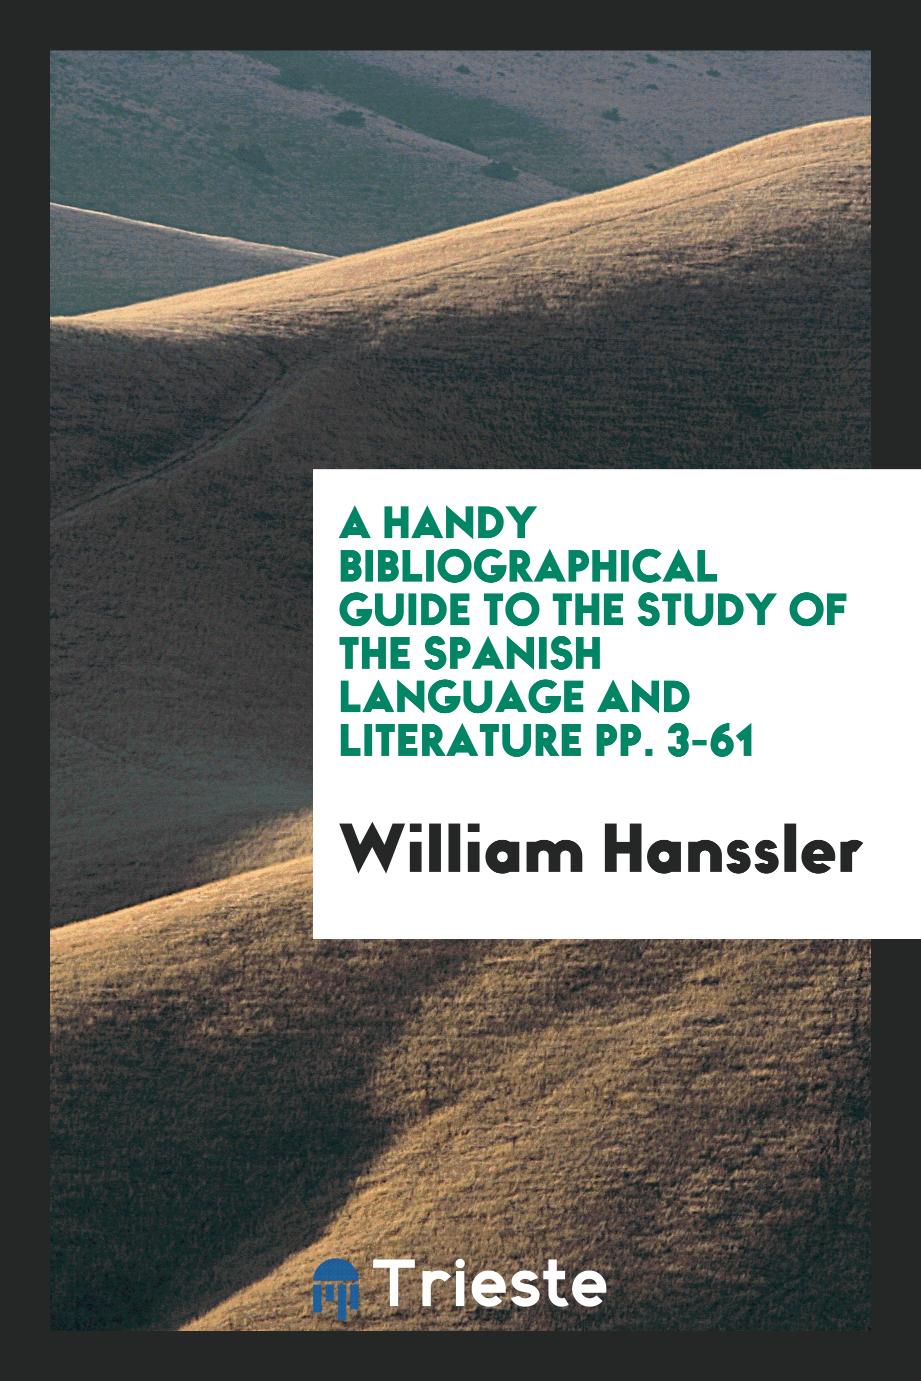 A Handy Bibliographical Guide to the Study of the Spanish Language and Literature pp. 3-61